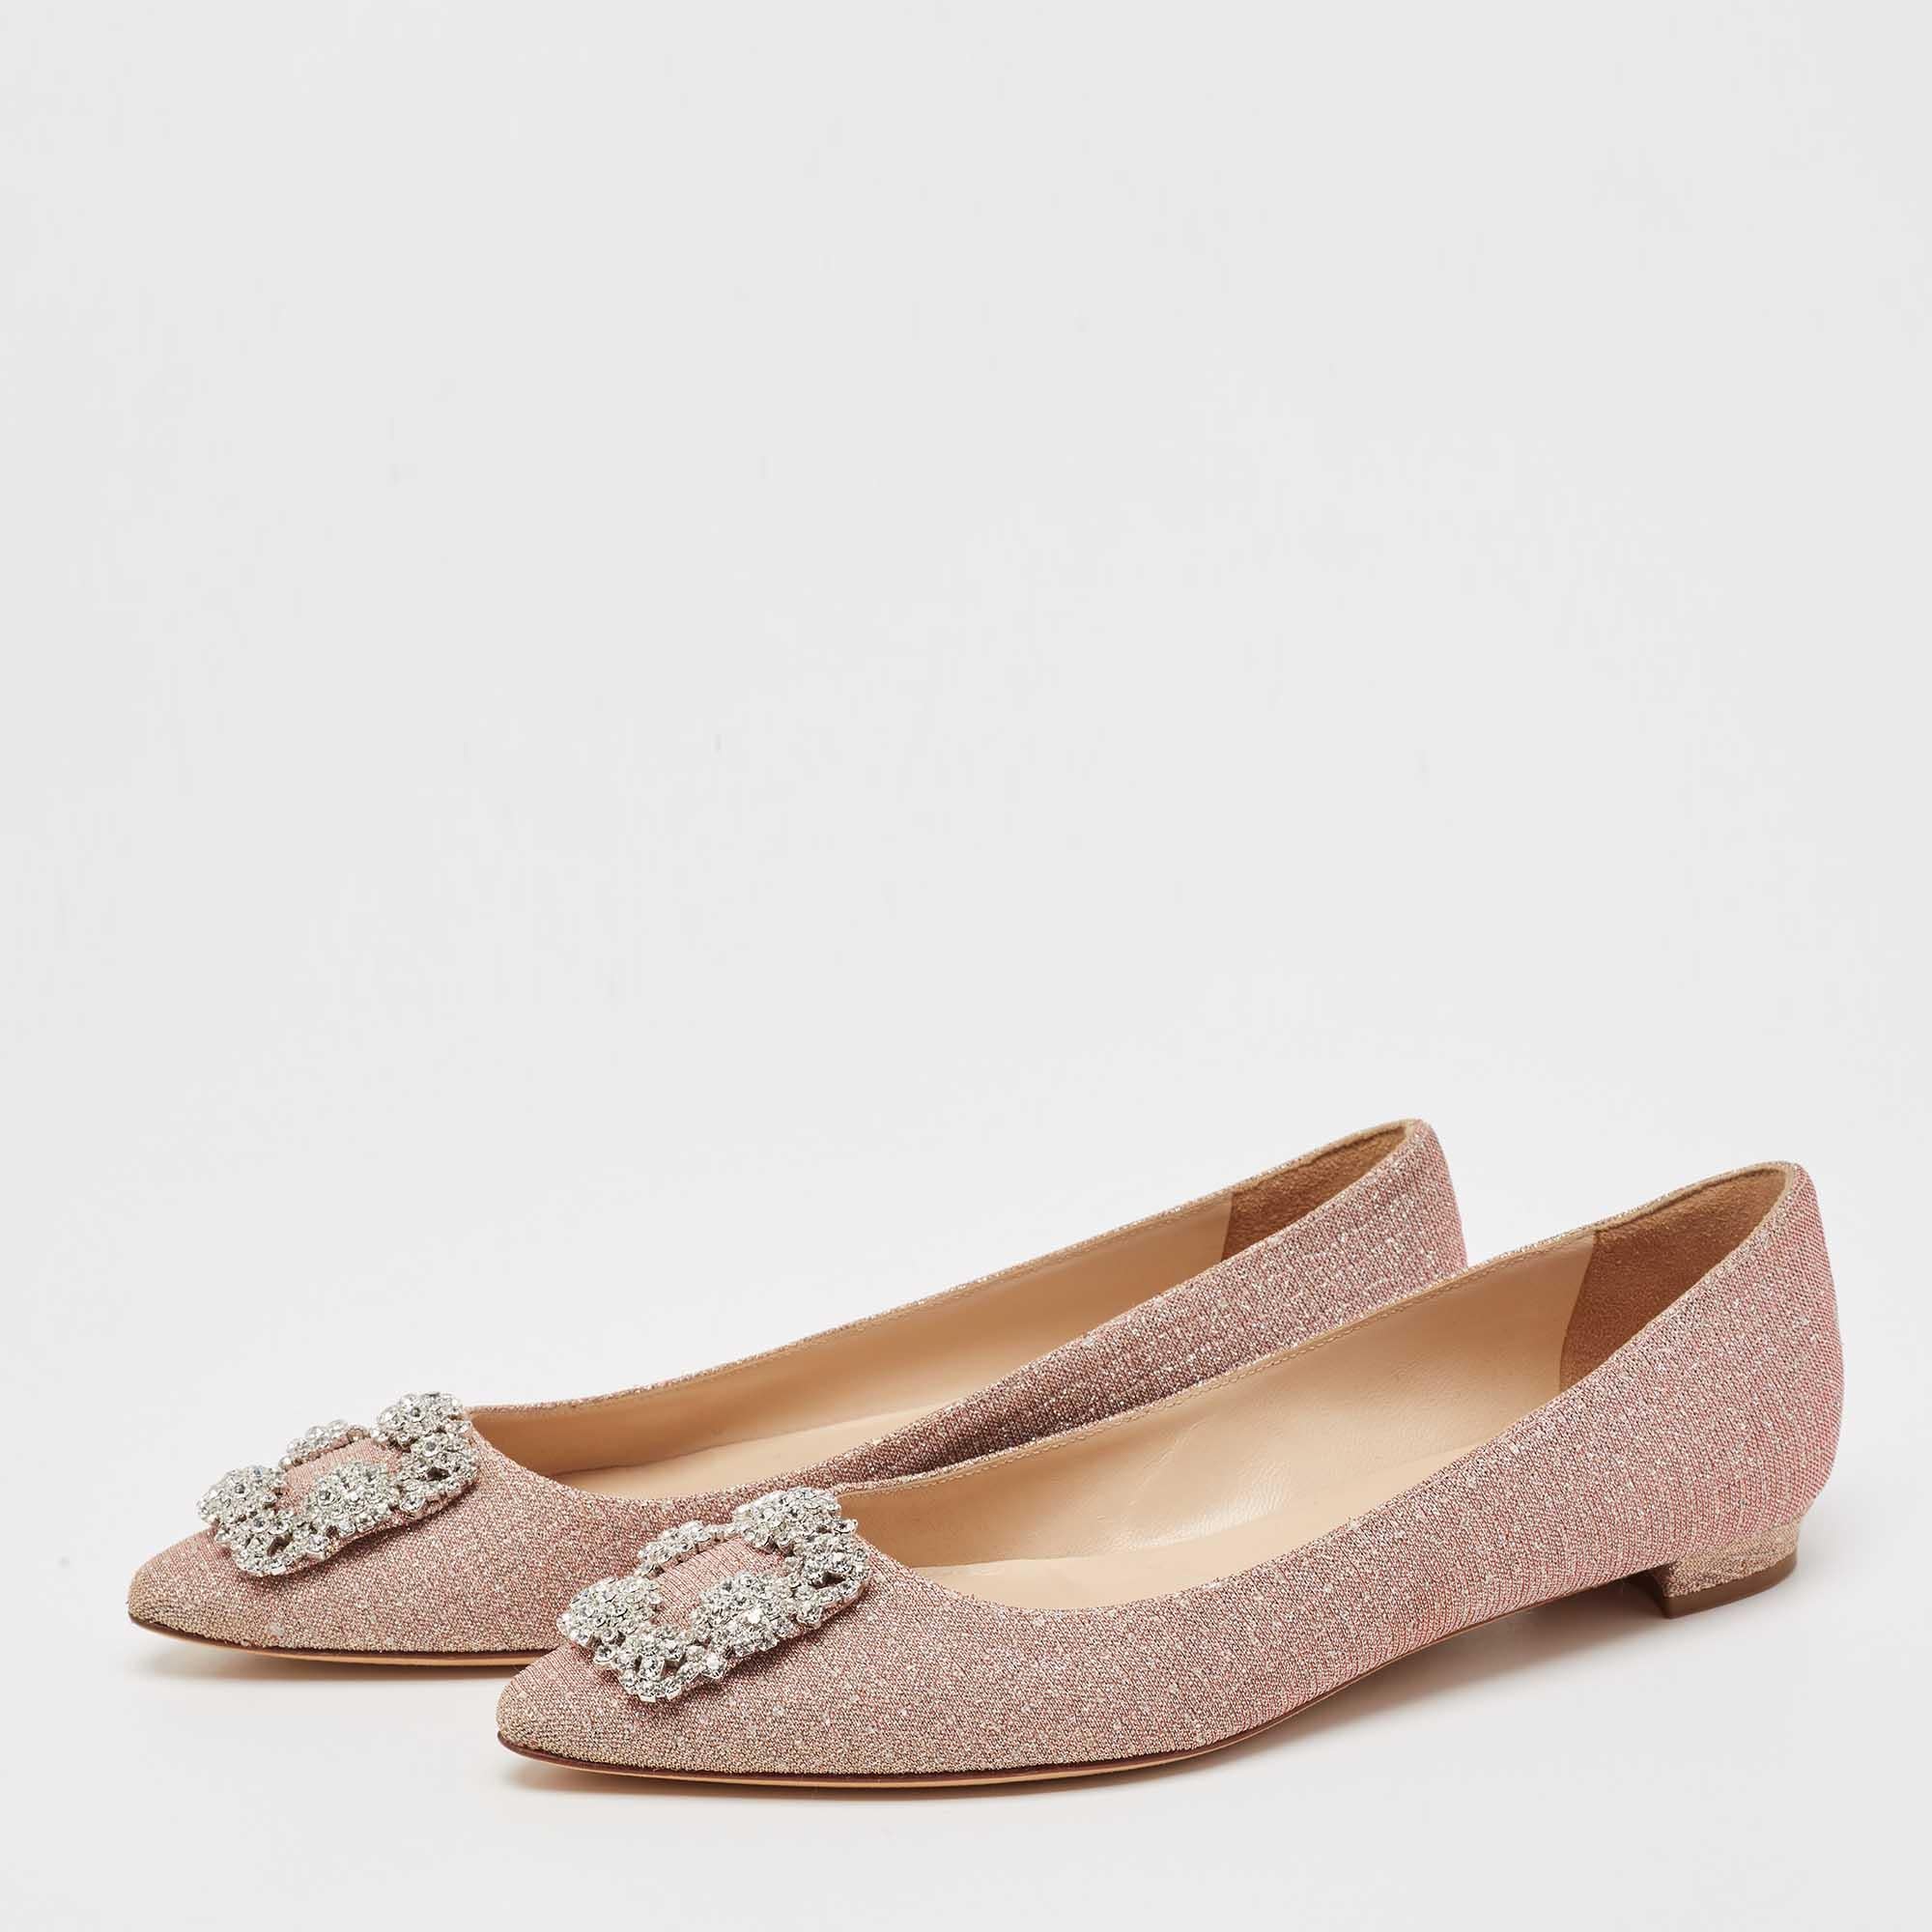 You know you are going to have a glamorous day the moment you put these ballet flats on. They are a Manolo Blahnik creation, meticulously crafted from glitter and lined with leather on the insoles. The pair carries a classic gold hue and